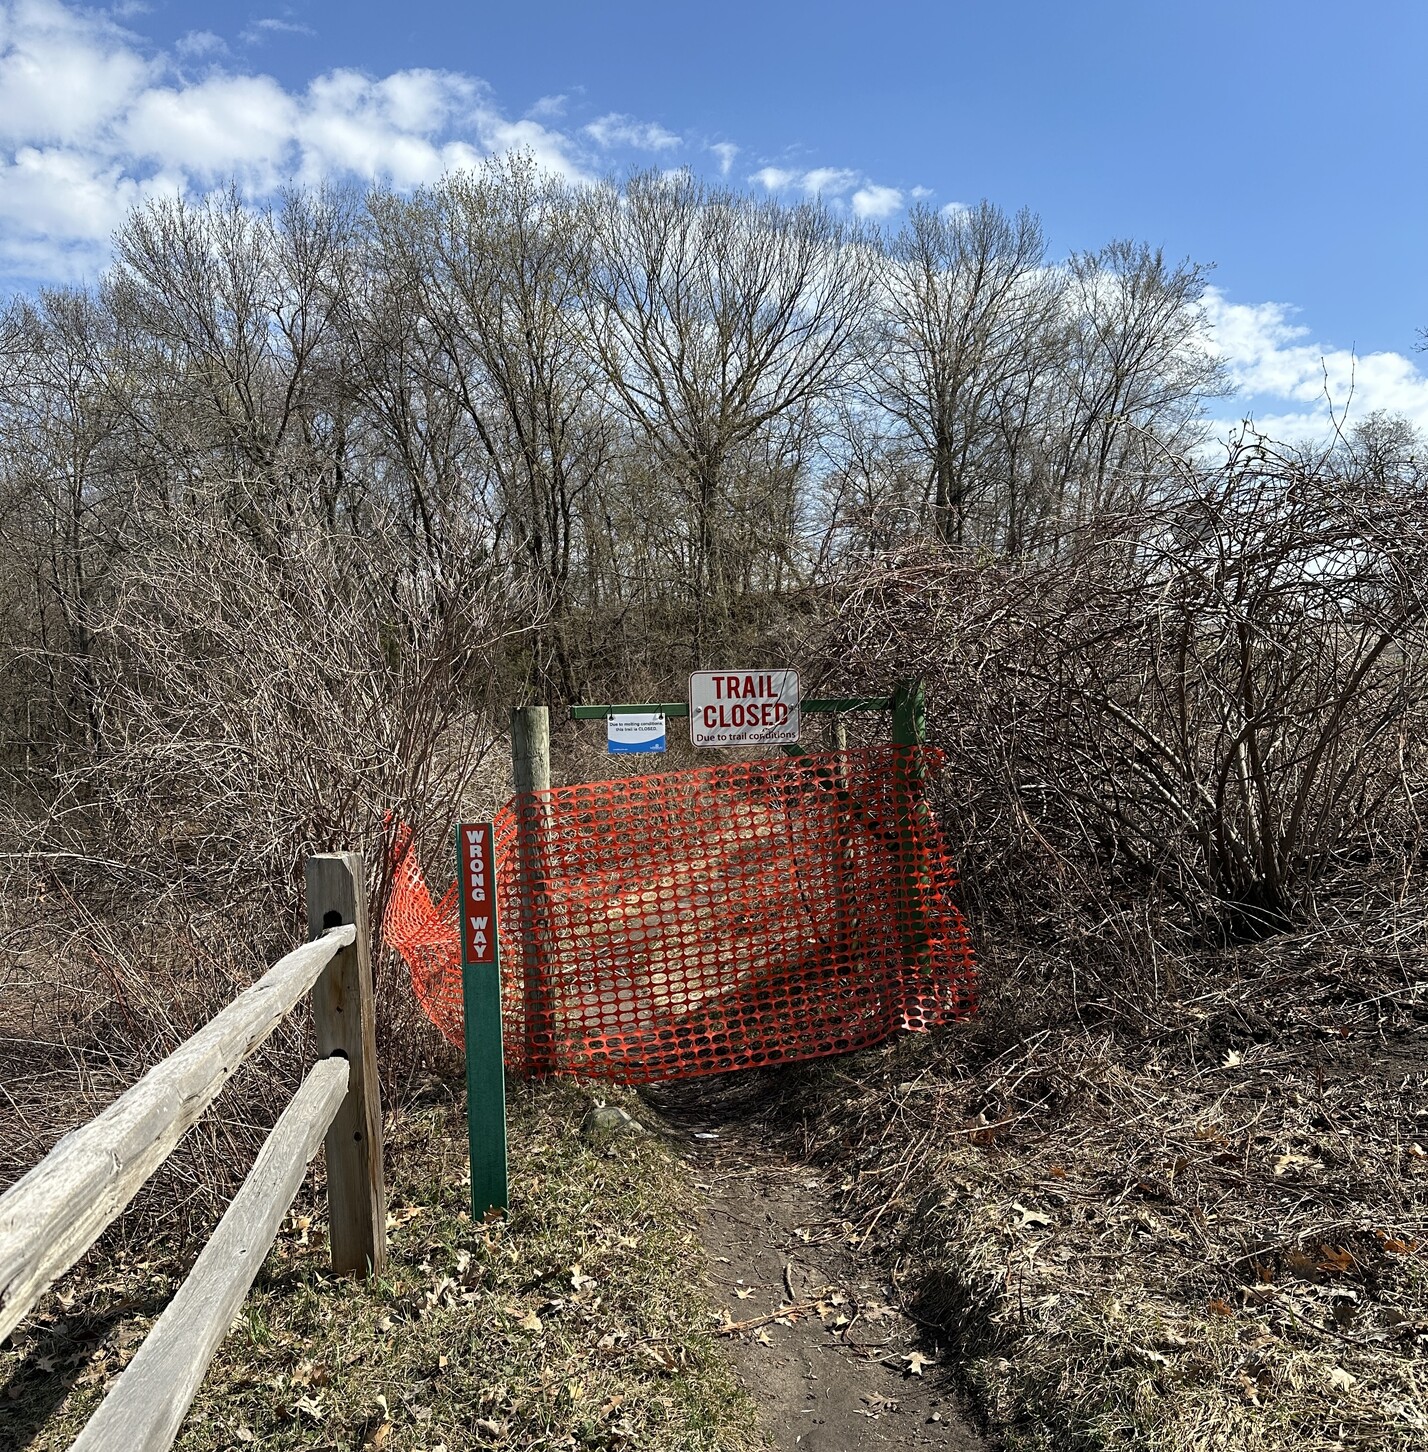 Blue sky, white clouds, orange fencing and a closed gate with signs telling bikers to stay off the trails for now @ Carver Lake Park in Woodbury, Minnesota